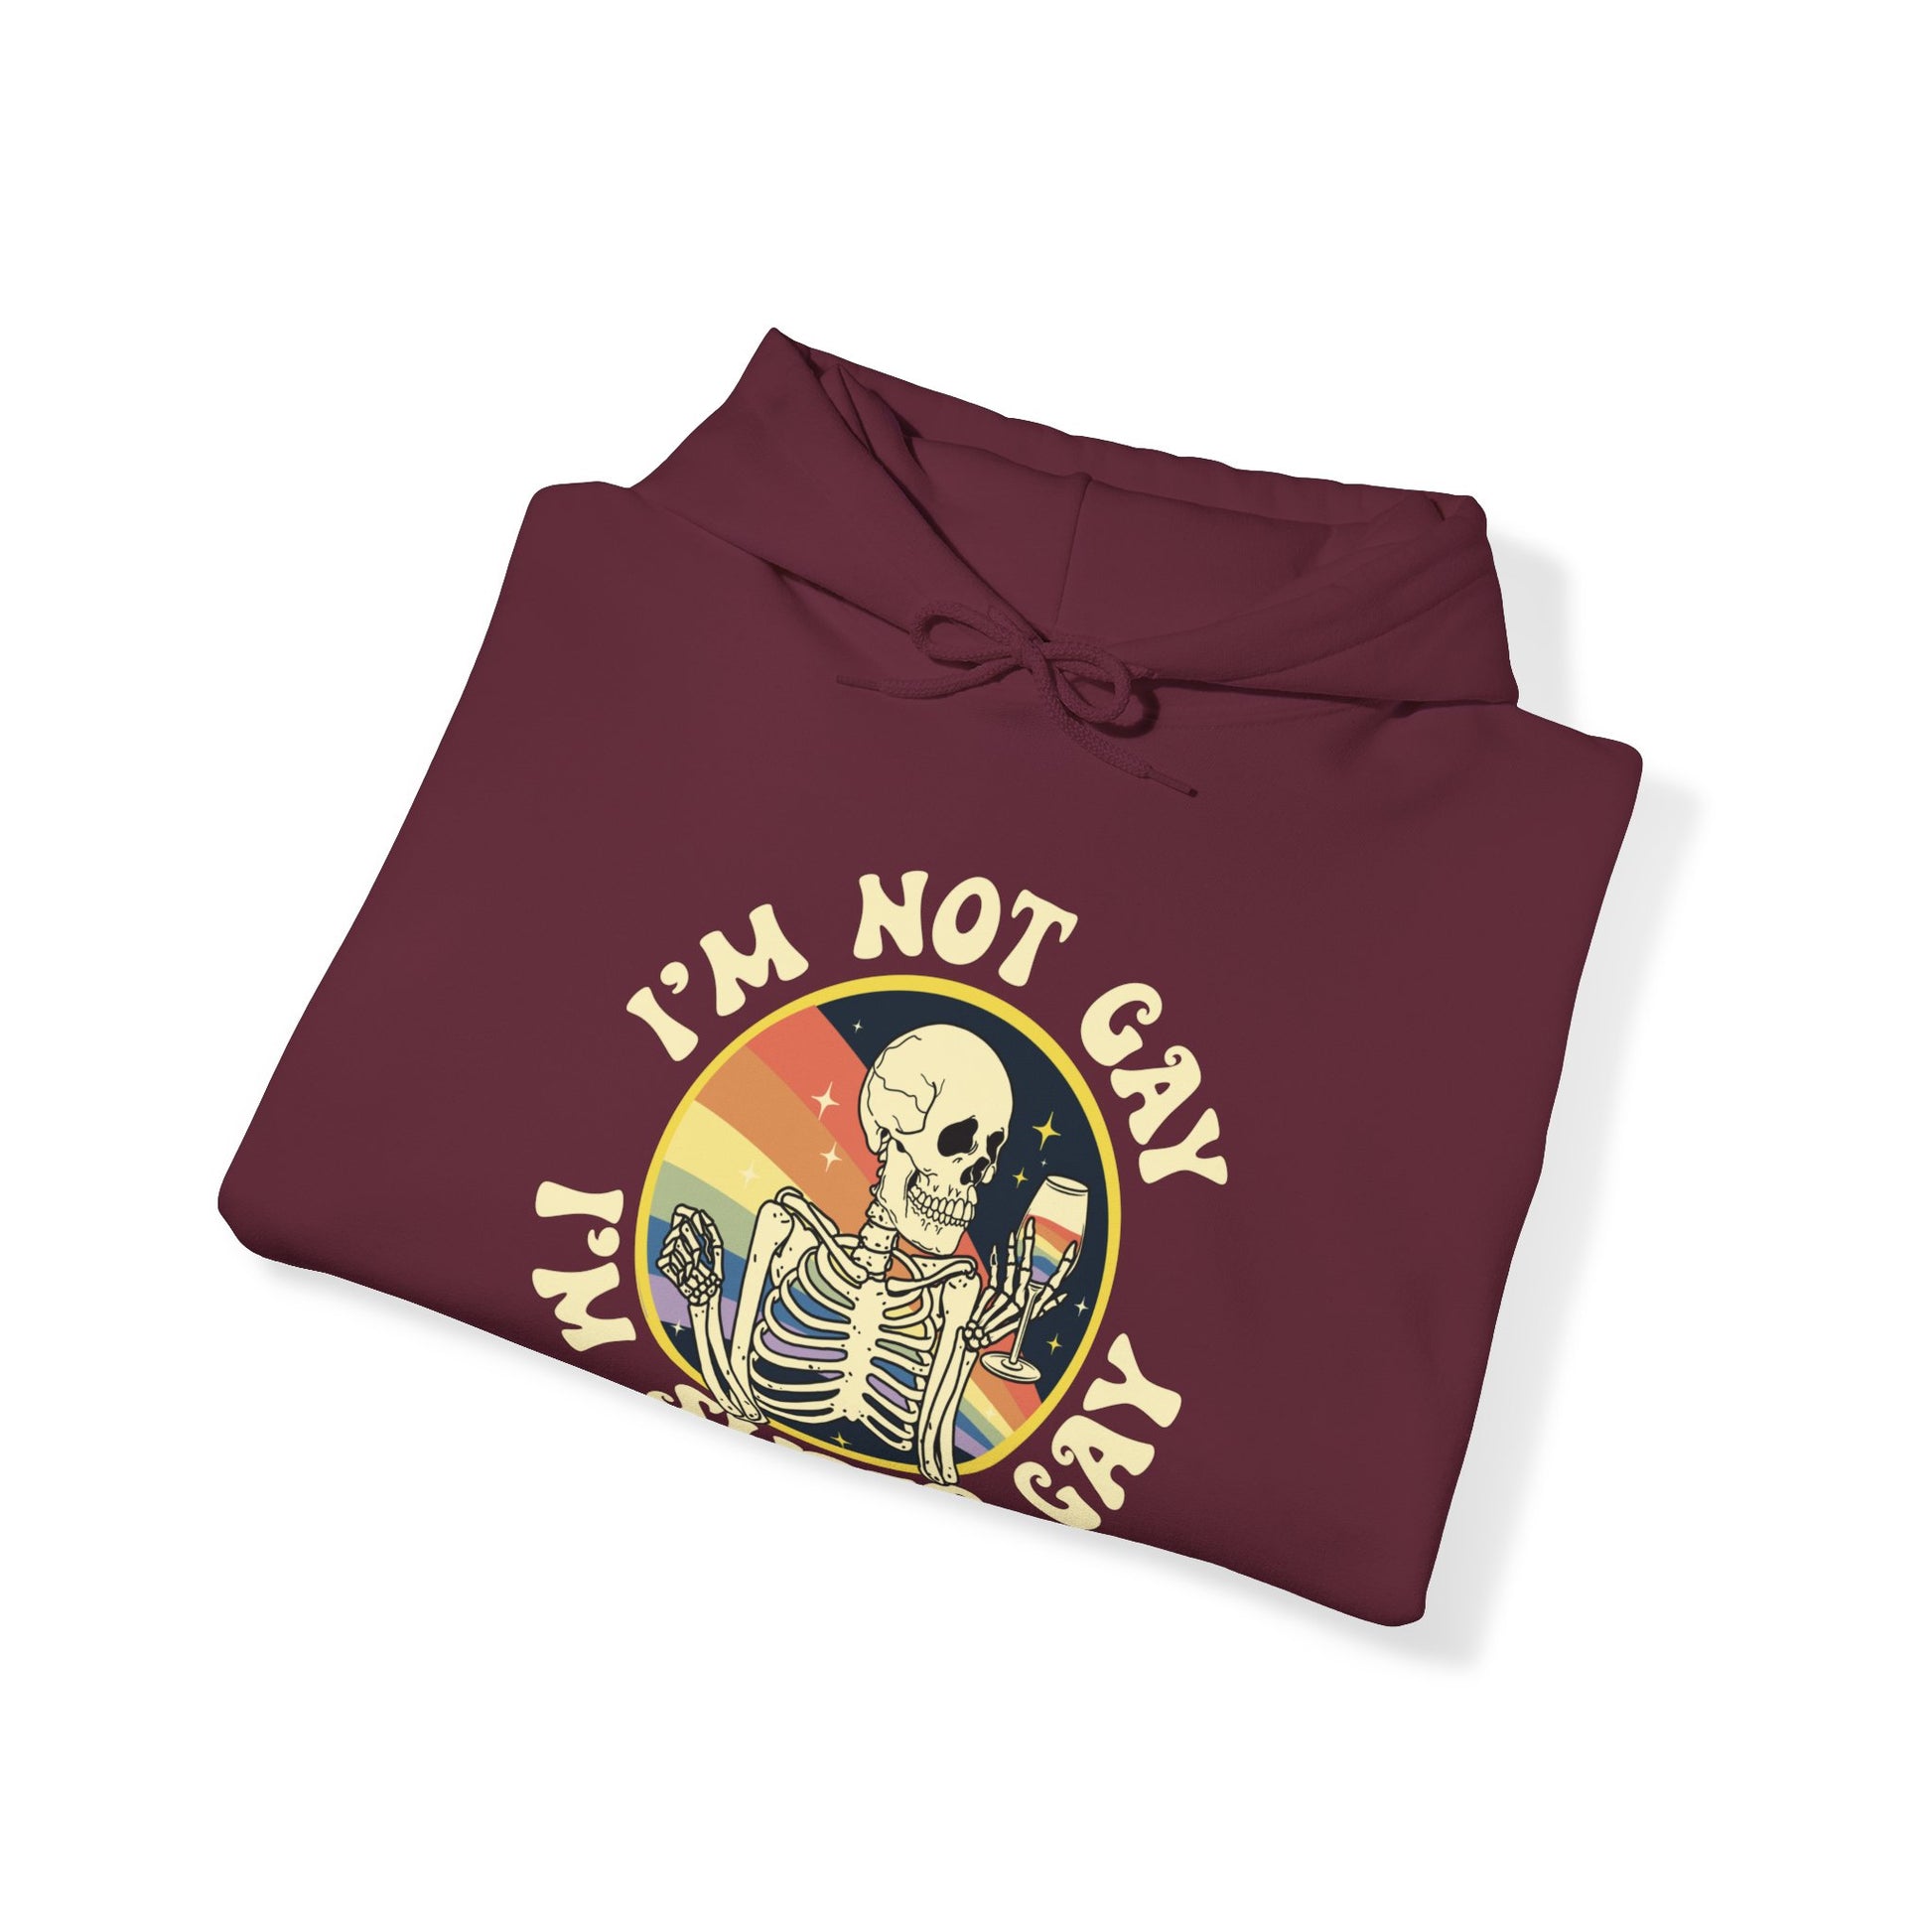 I'm Not Gay I'm Super Gay Hoodie - Equality Trading Post 